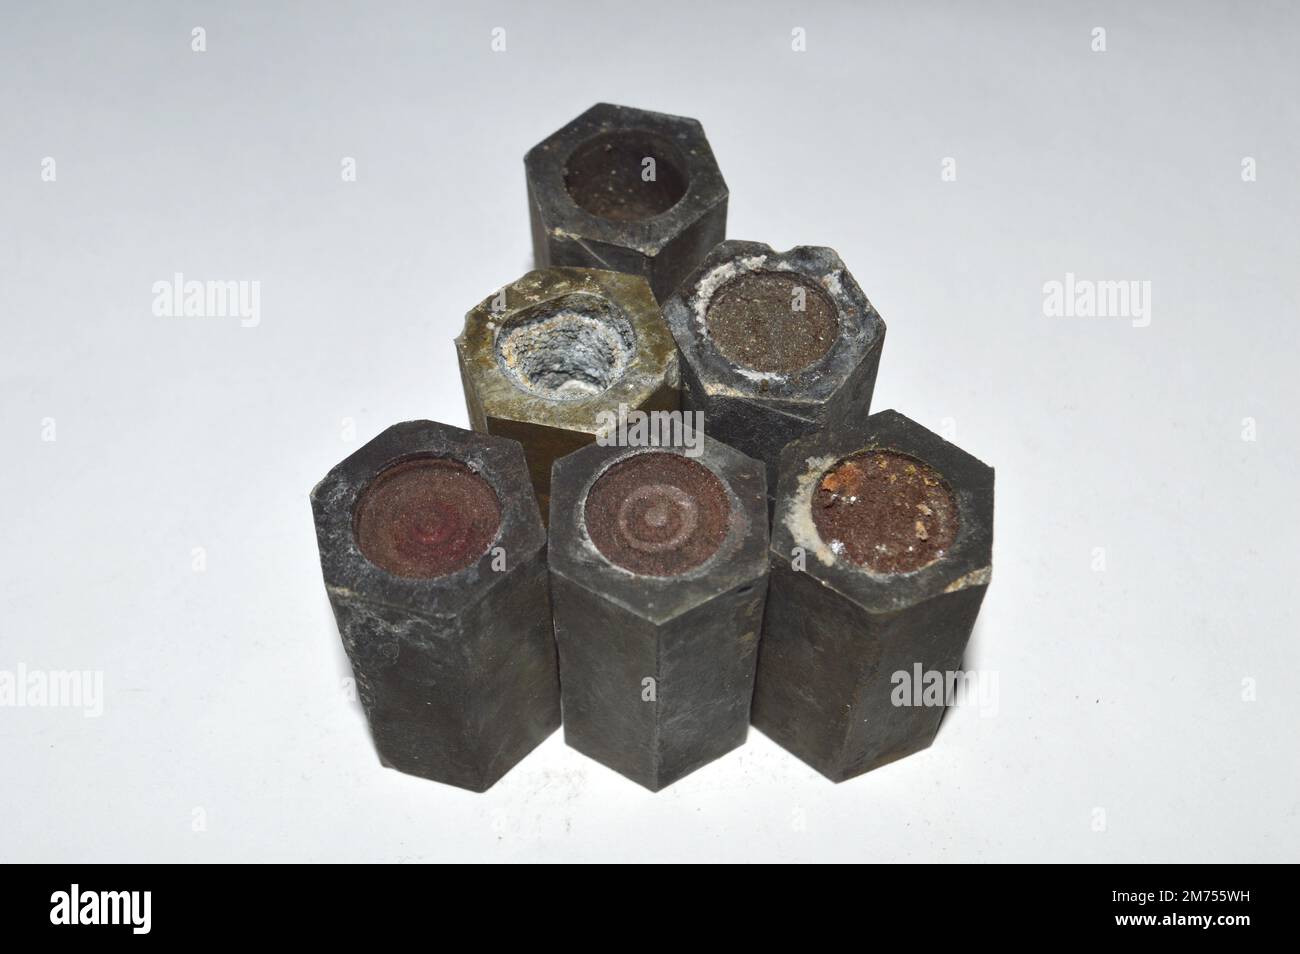 burnt capsules from the 9M22S for MLRS Grad projectile  containing an incendiary composition were found in eastern Ukraine Stock Photo